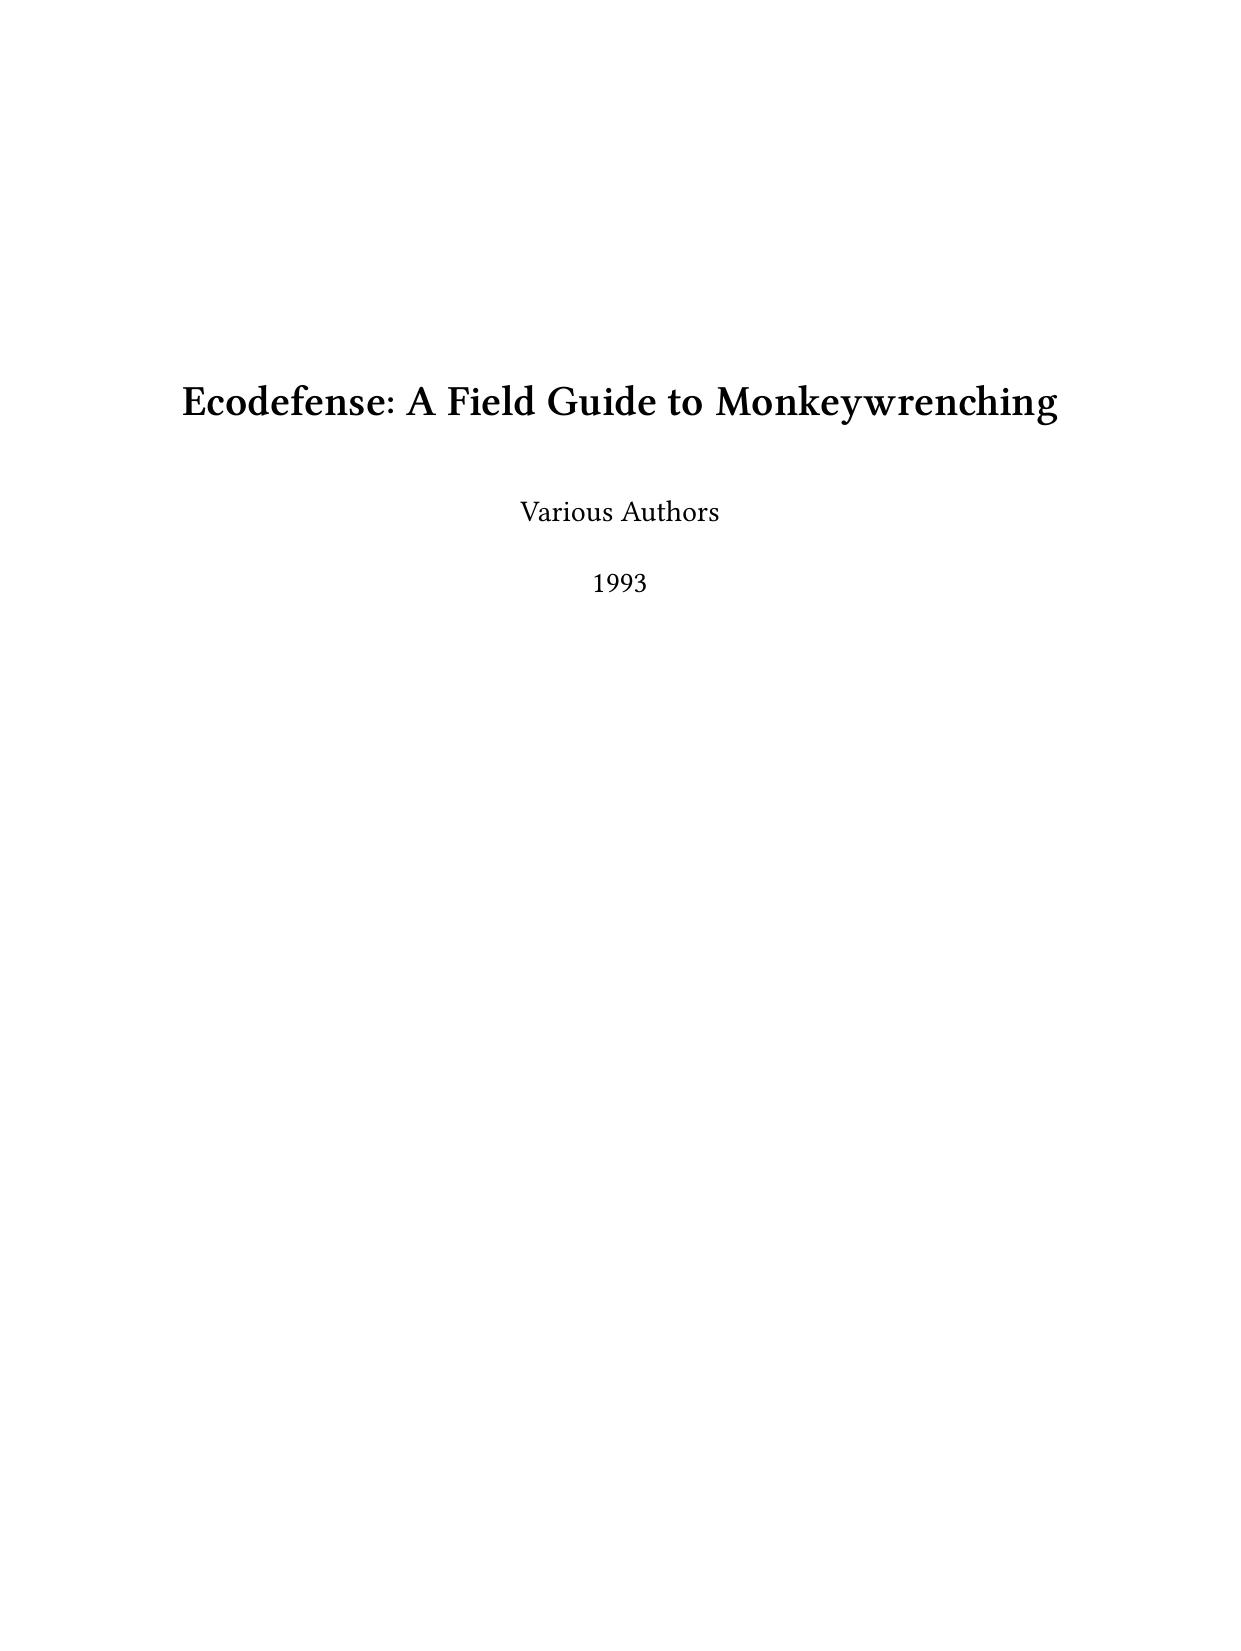 Ecodefense: A Field Guide to Monkeywrenching